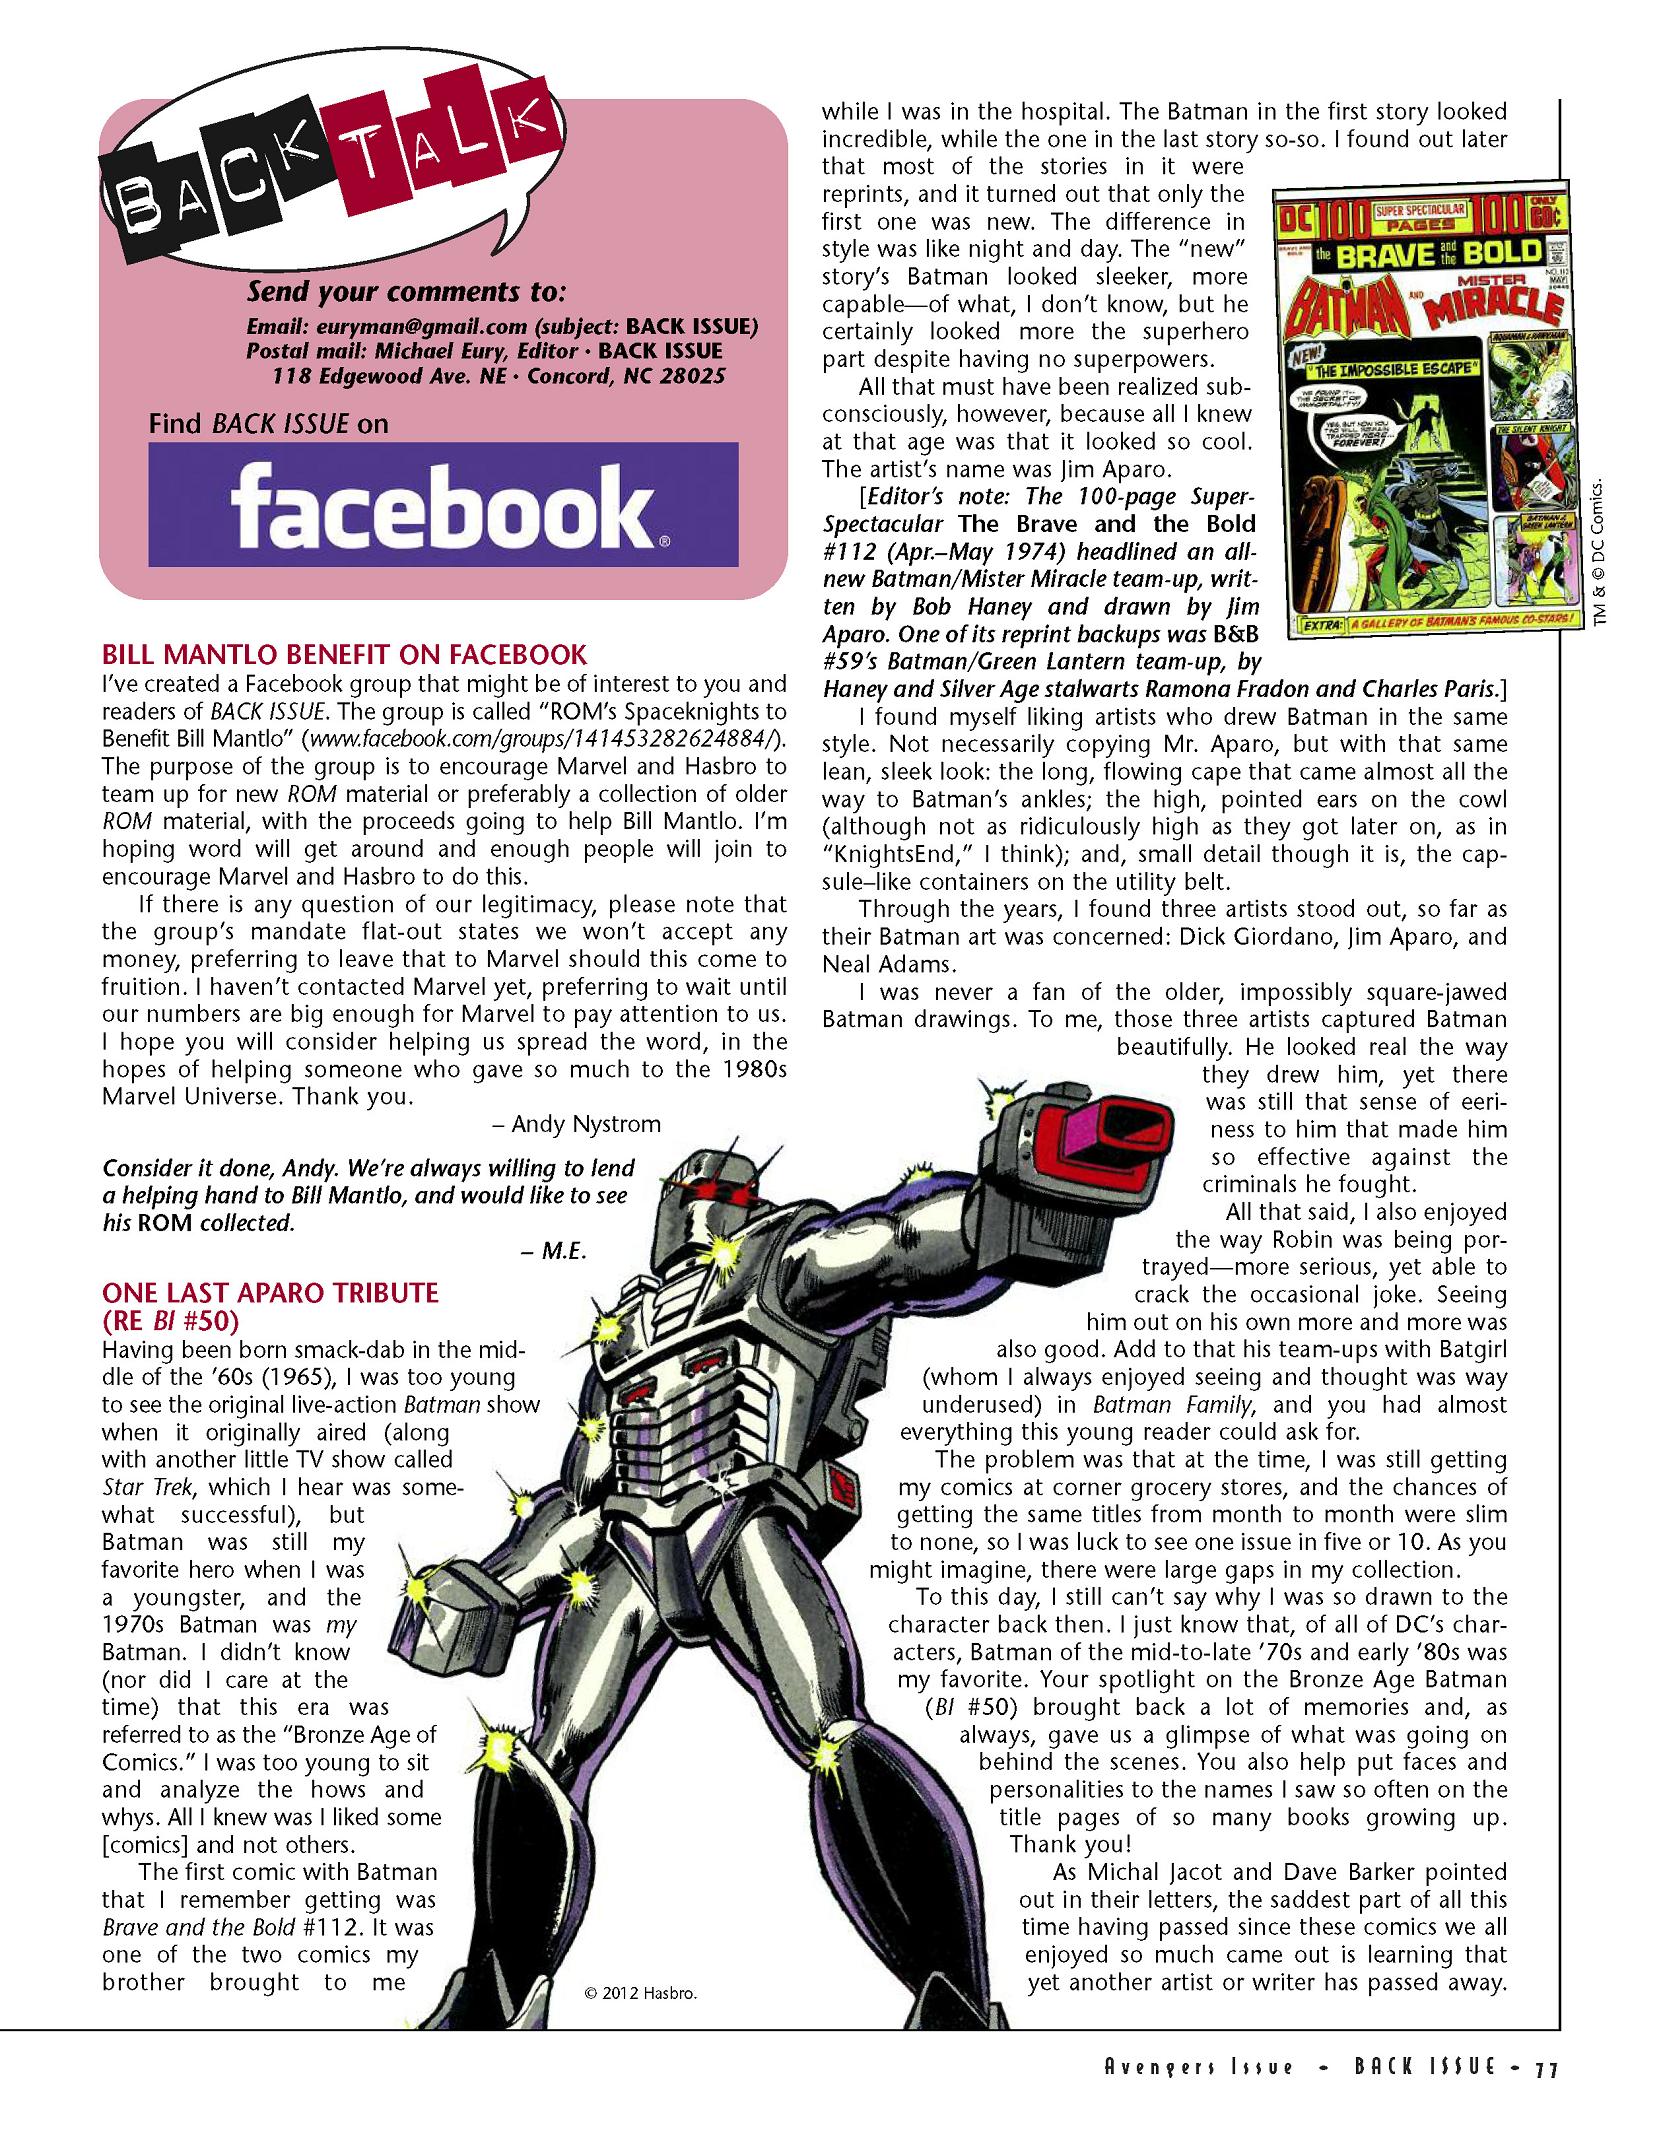 Read online Back Issue comic -  Issue #56 - 74